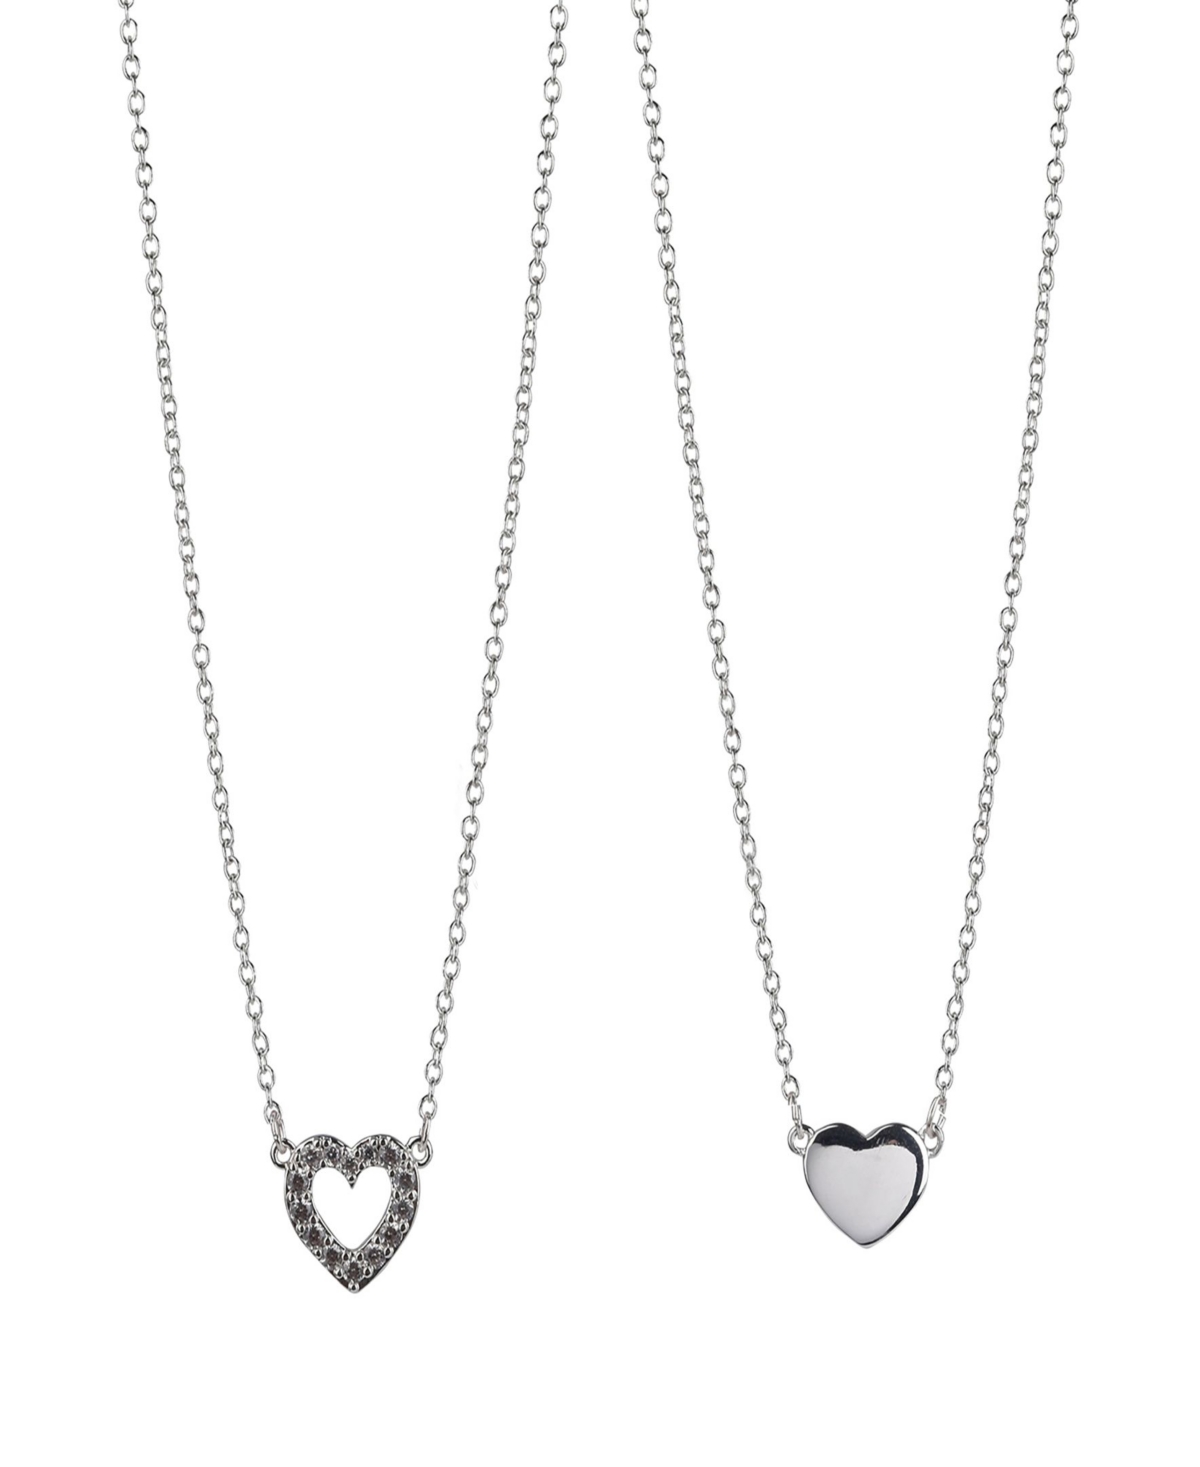 Fine Silver Plated Heart Pendant Mommy and Me Necklace Set, 2 Piece - Silver Plated